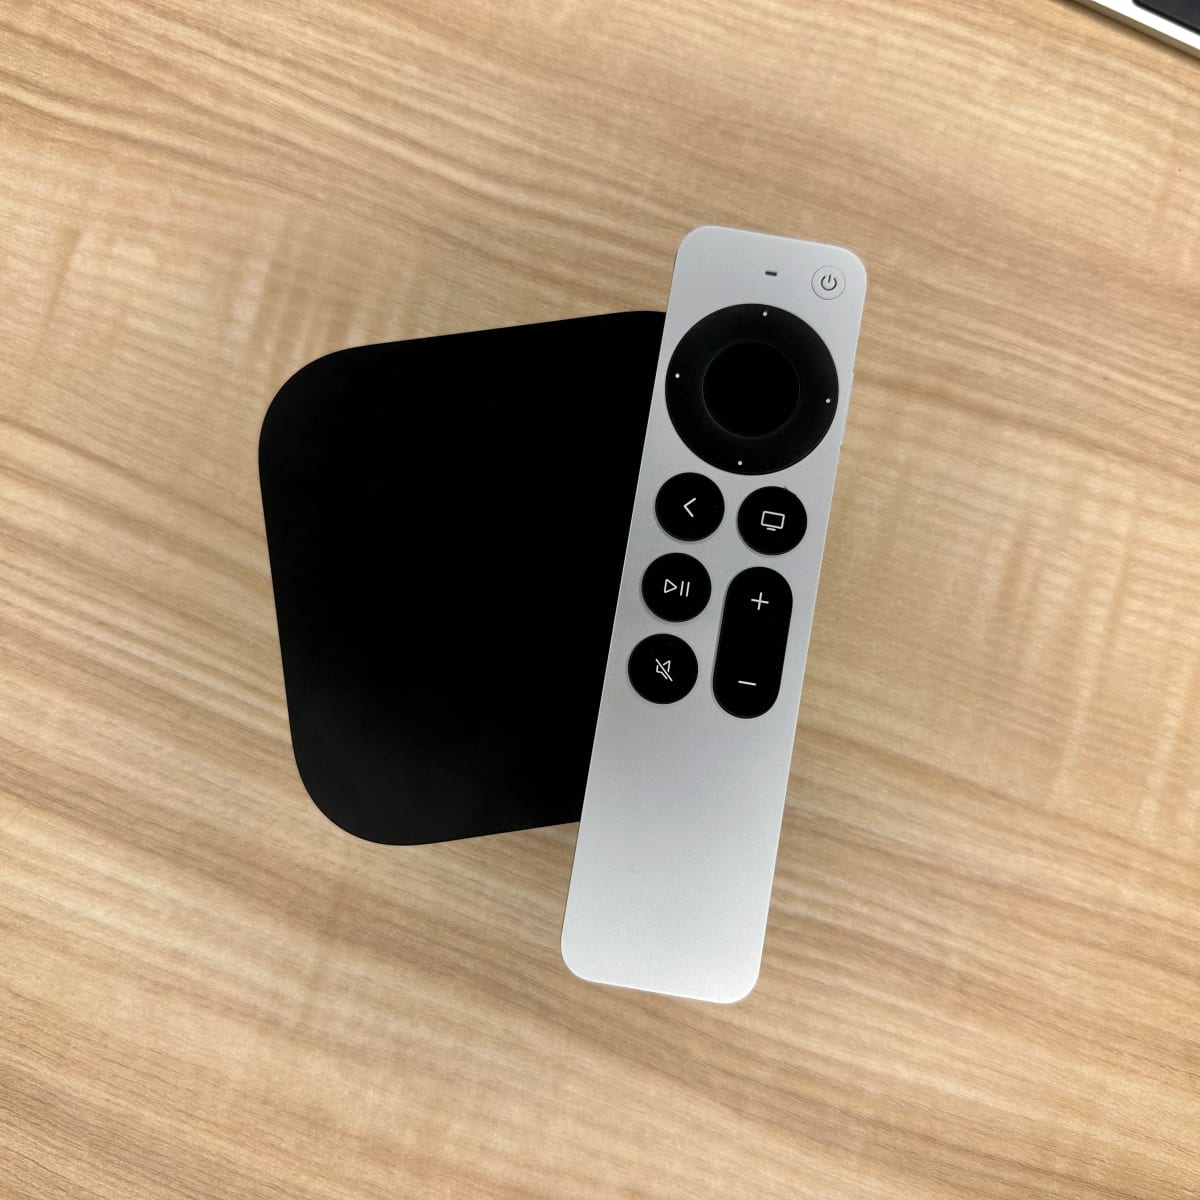 Users Streaming Apple Review: Supercharged Apple For Illustrated TV Sports Gen 3rd 4K -